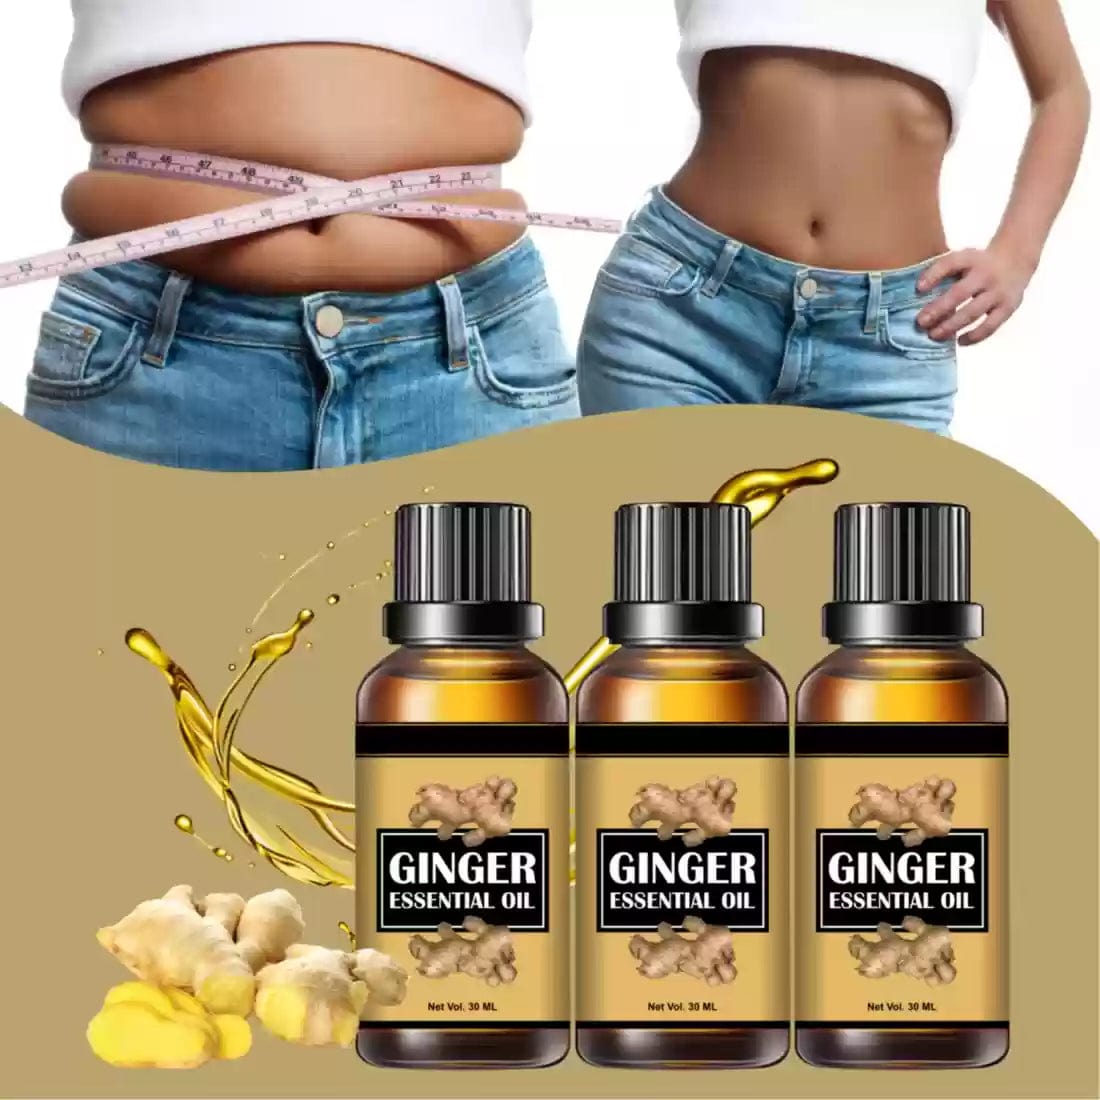 Best Essential Oils Ginger Oil Belly Button Oiling Benefits - Soothyxo™ Soothyxo™ Zaavio®